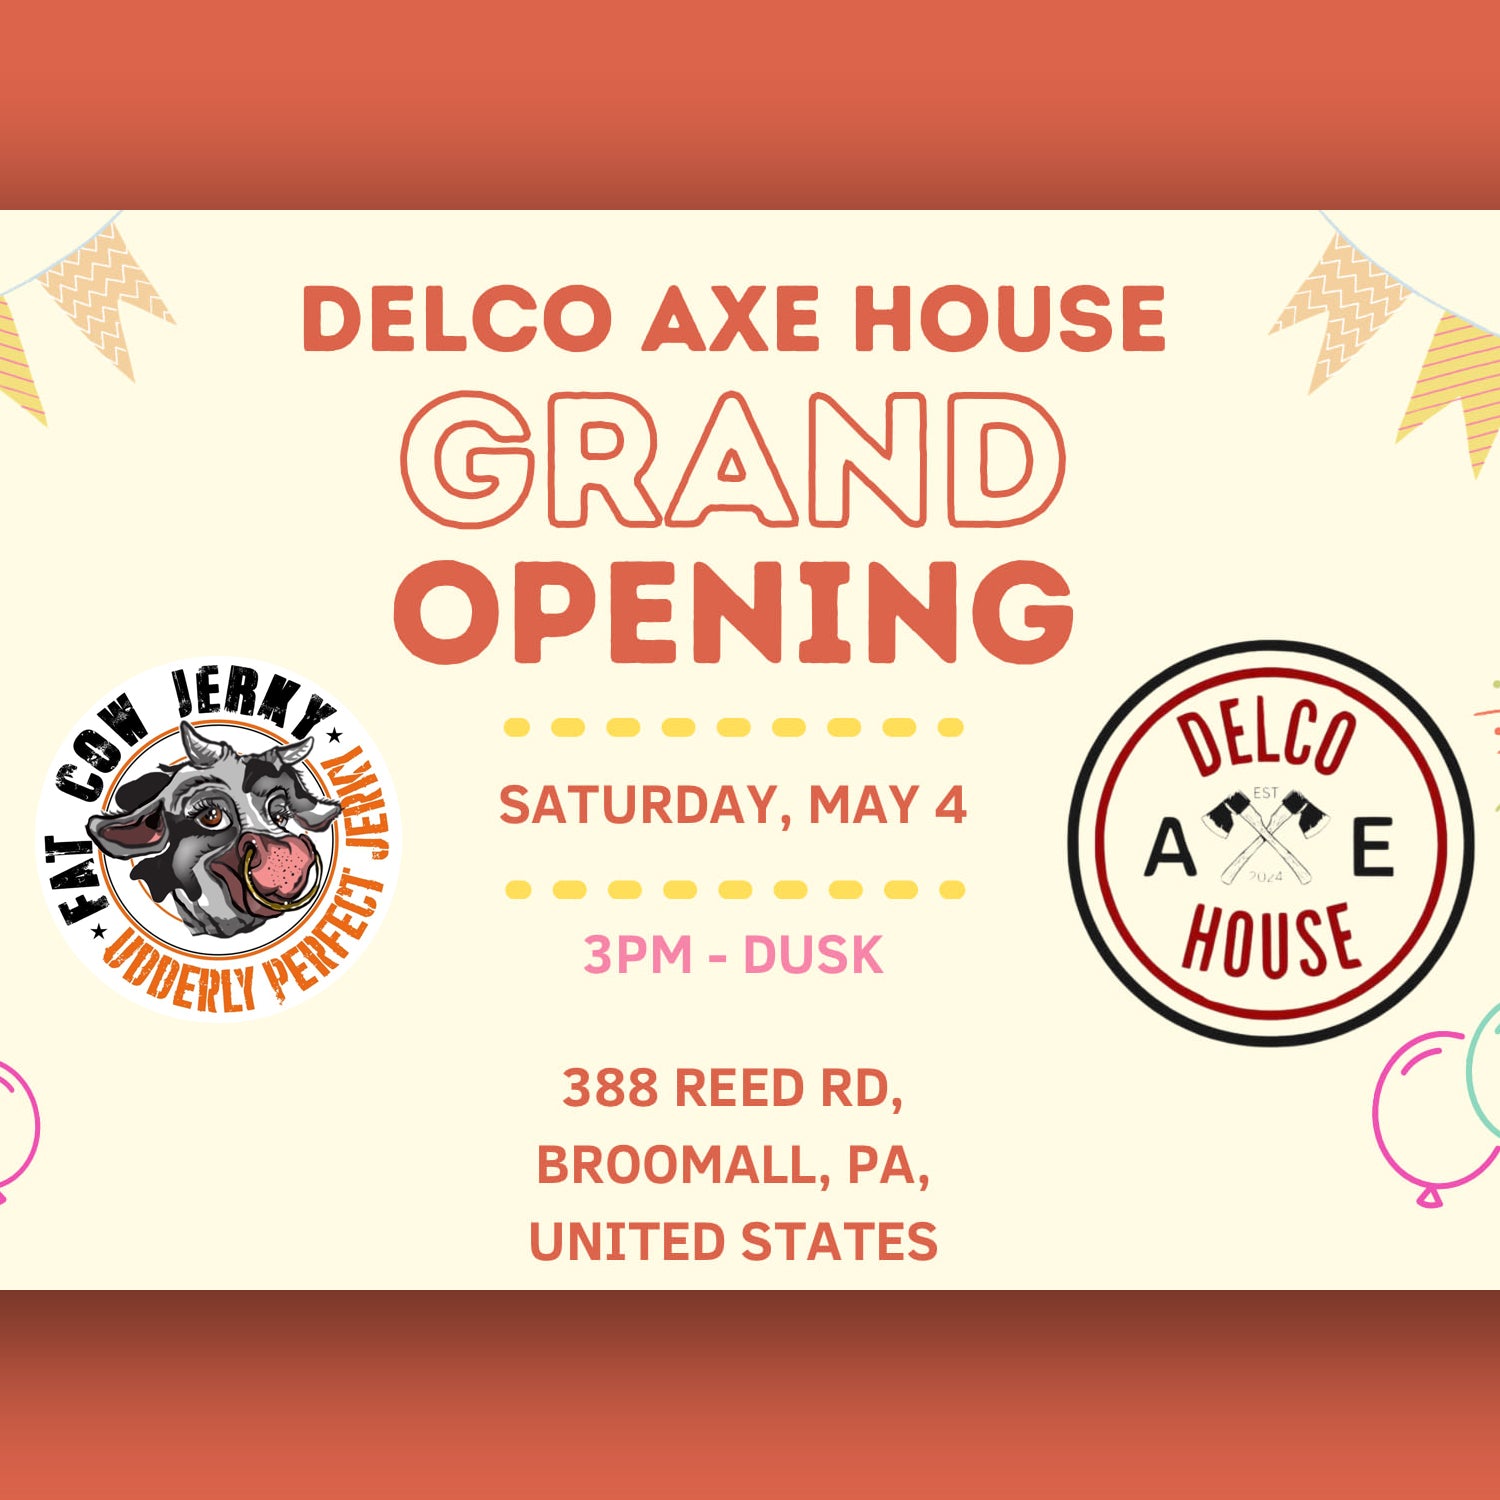 We'll be at the Delco Axe House Grand Opening - May 4.